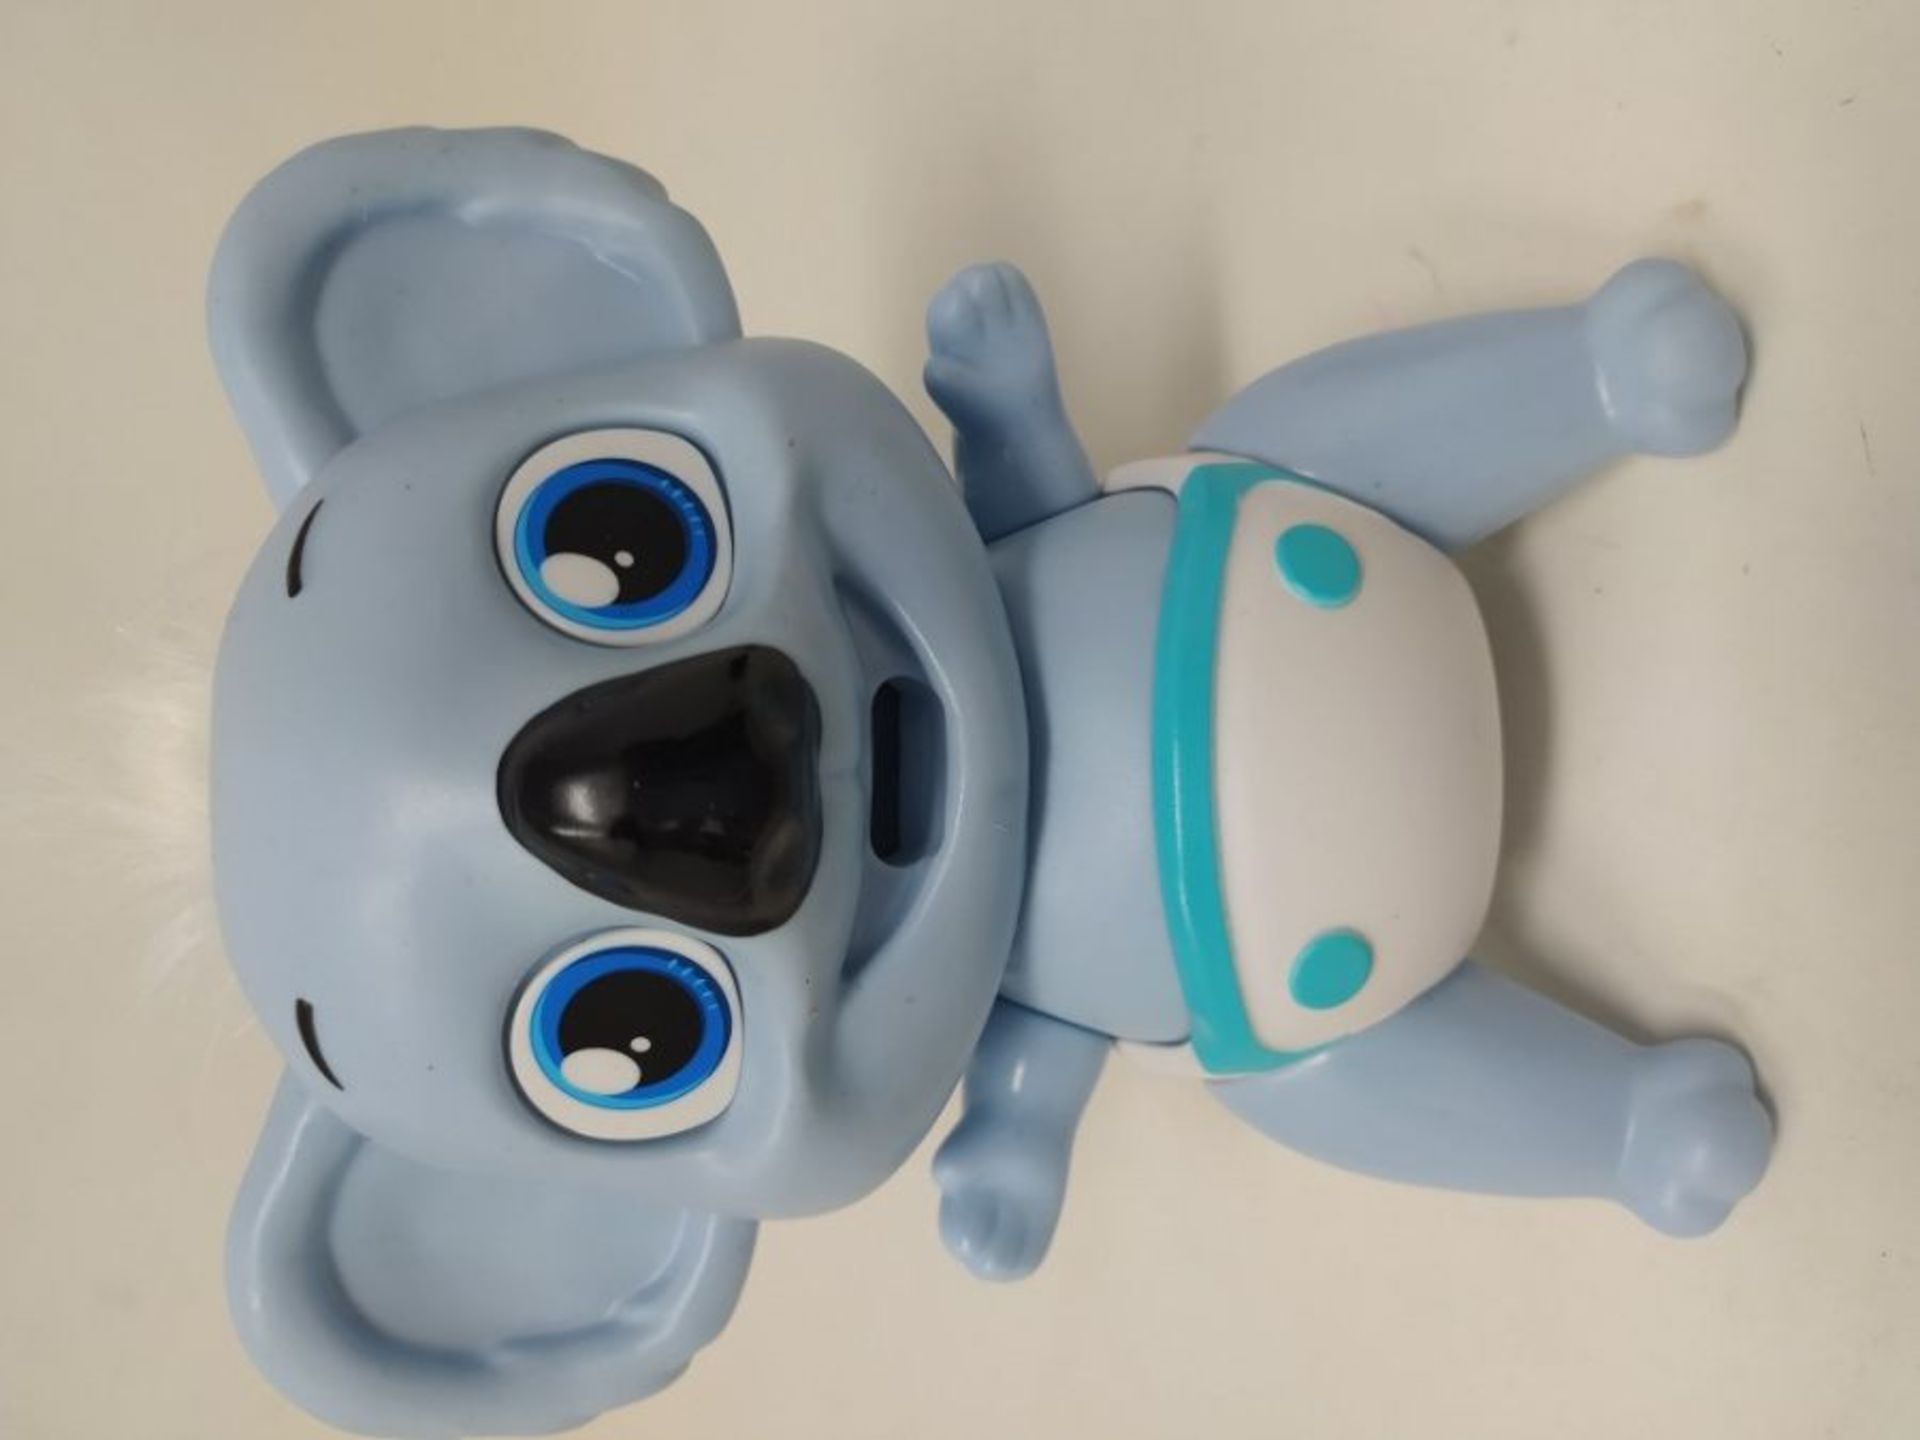 Munchkinz Interactive pet Koala with 30+ Sounds and Movement, Multi-Colour - Image 2 of 2